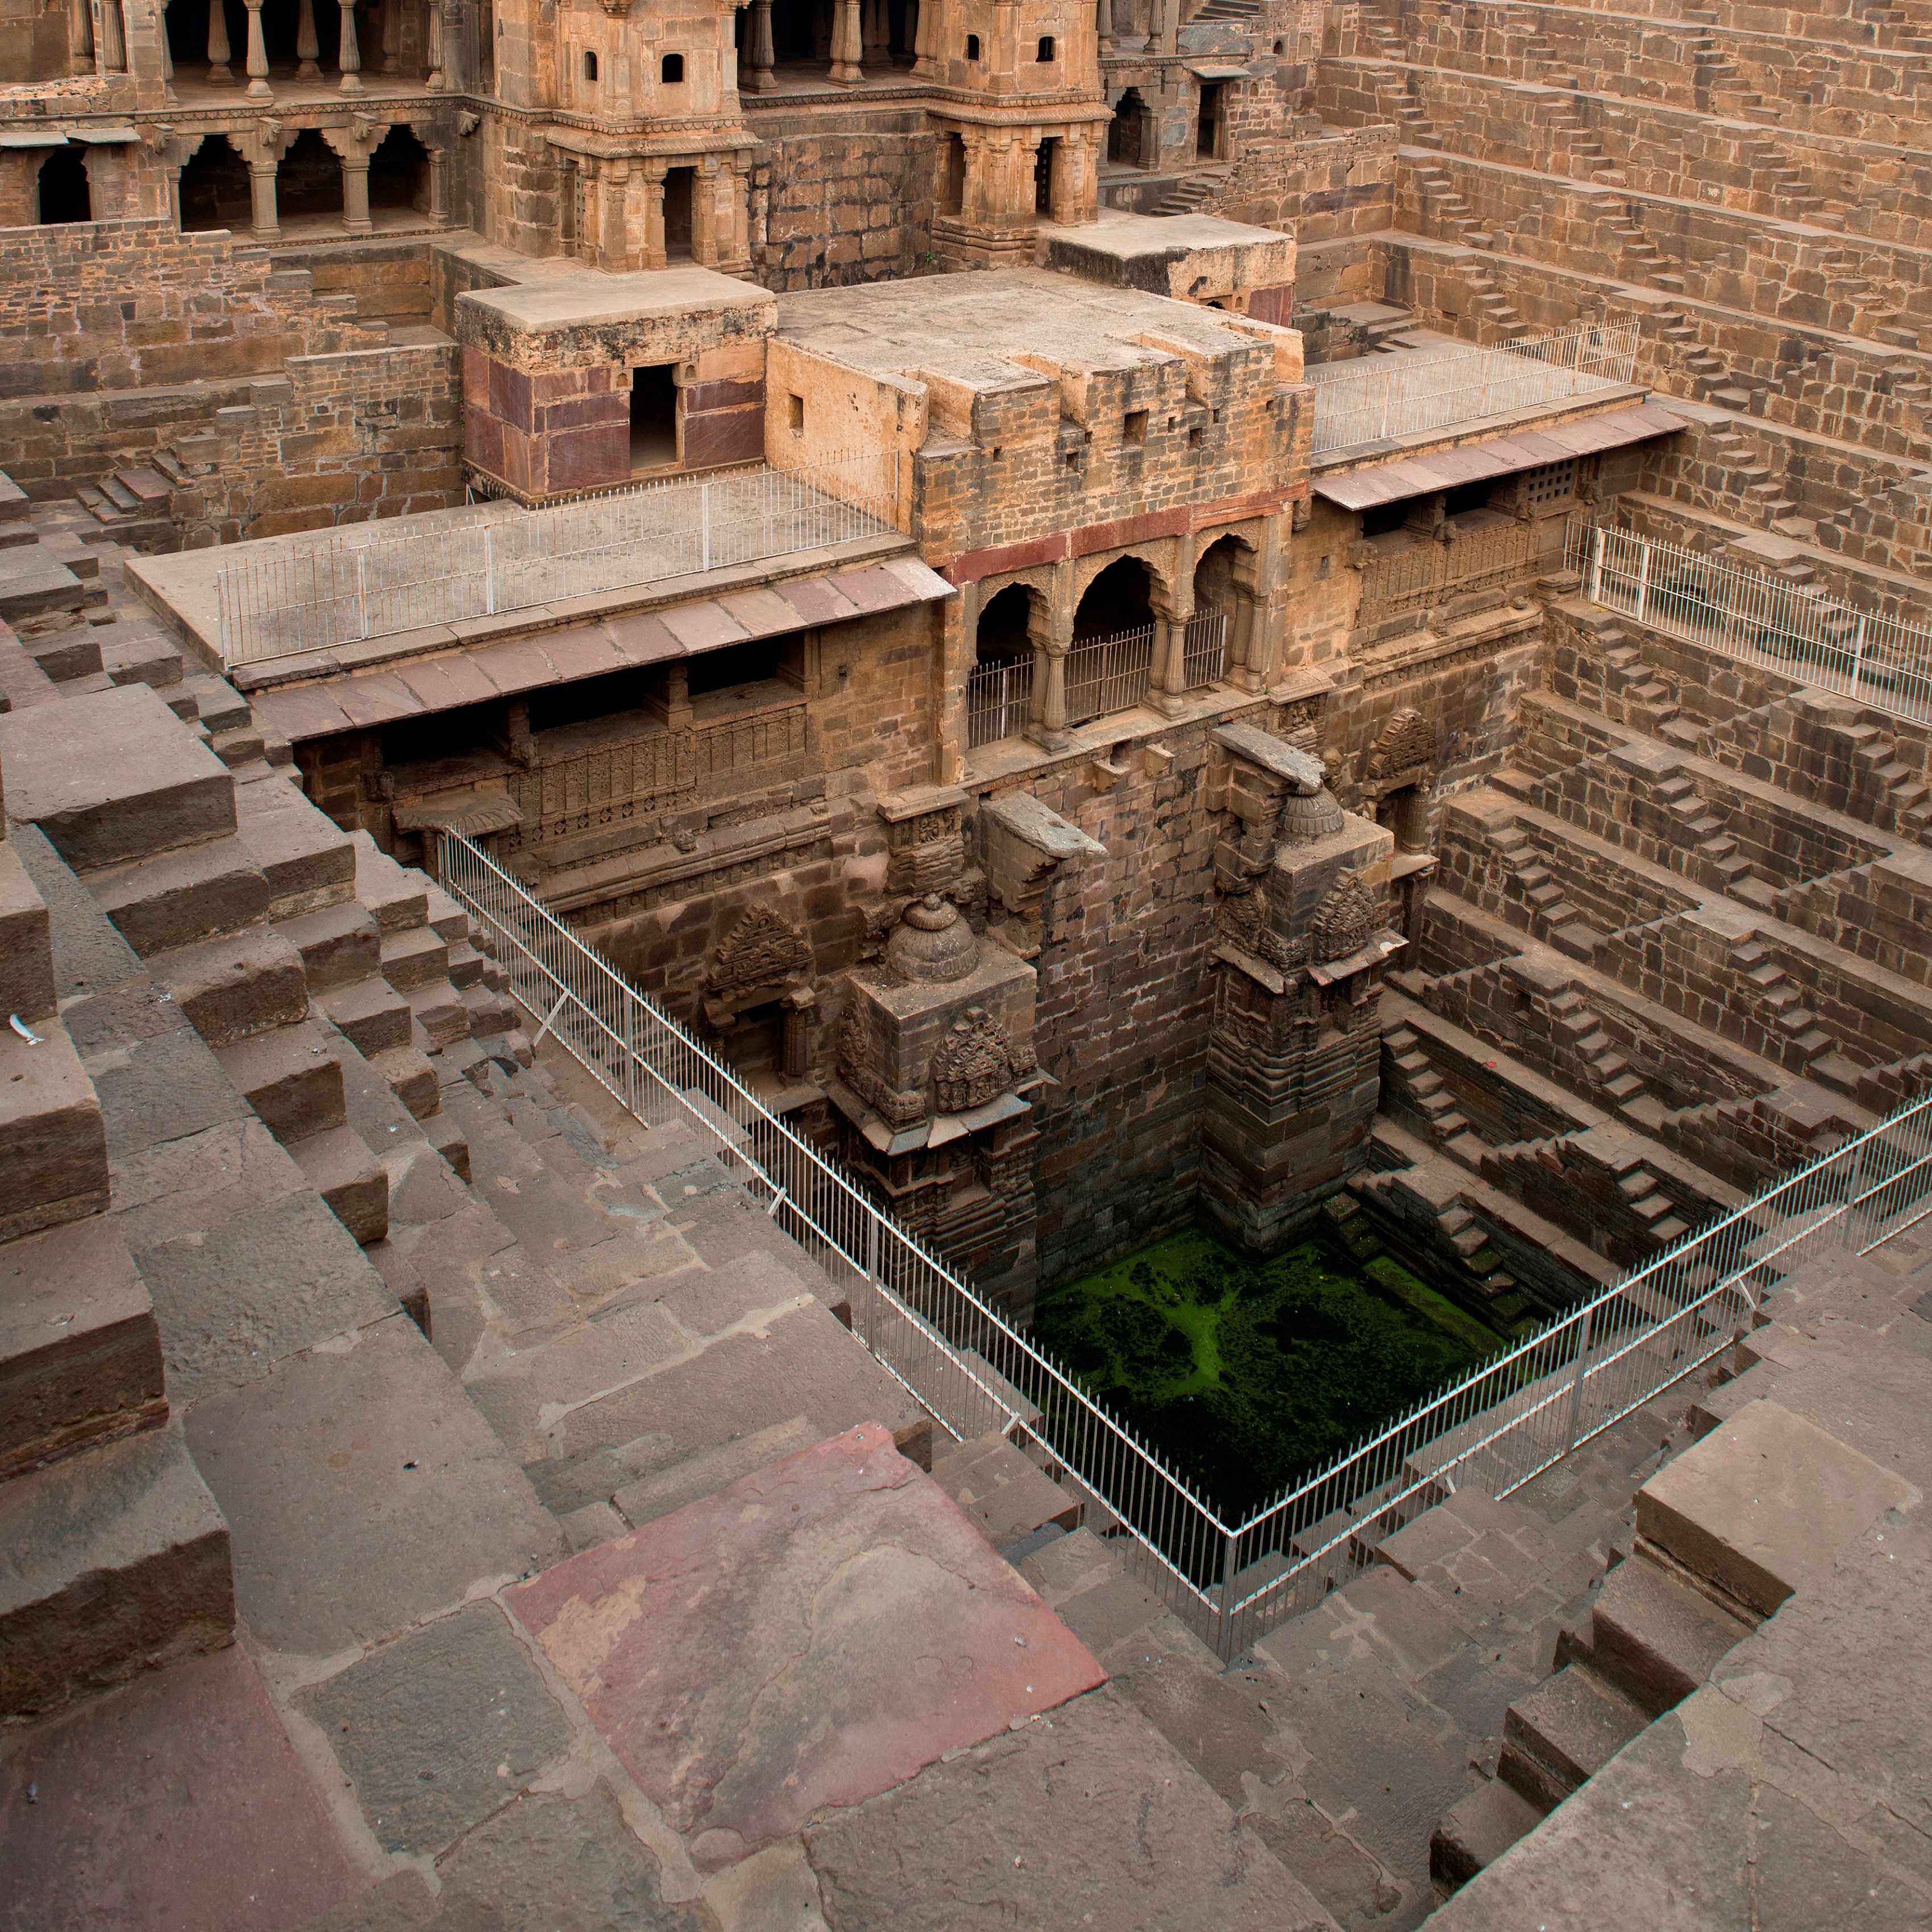 india rajasthan abhneri  water tank photo by hermes imagesagfuniversal images group via getty images